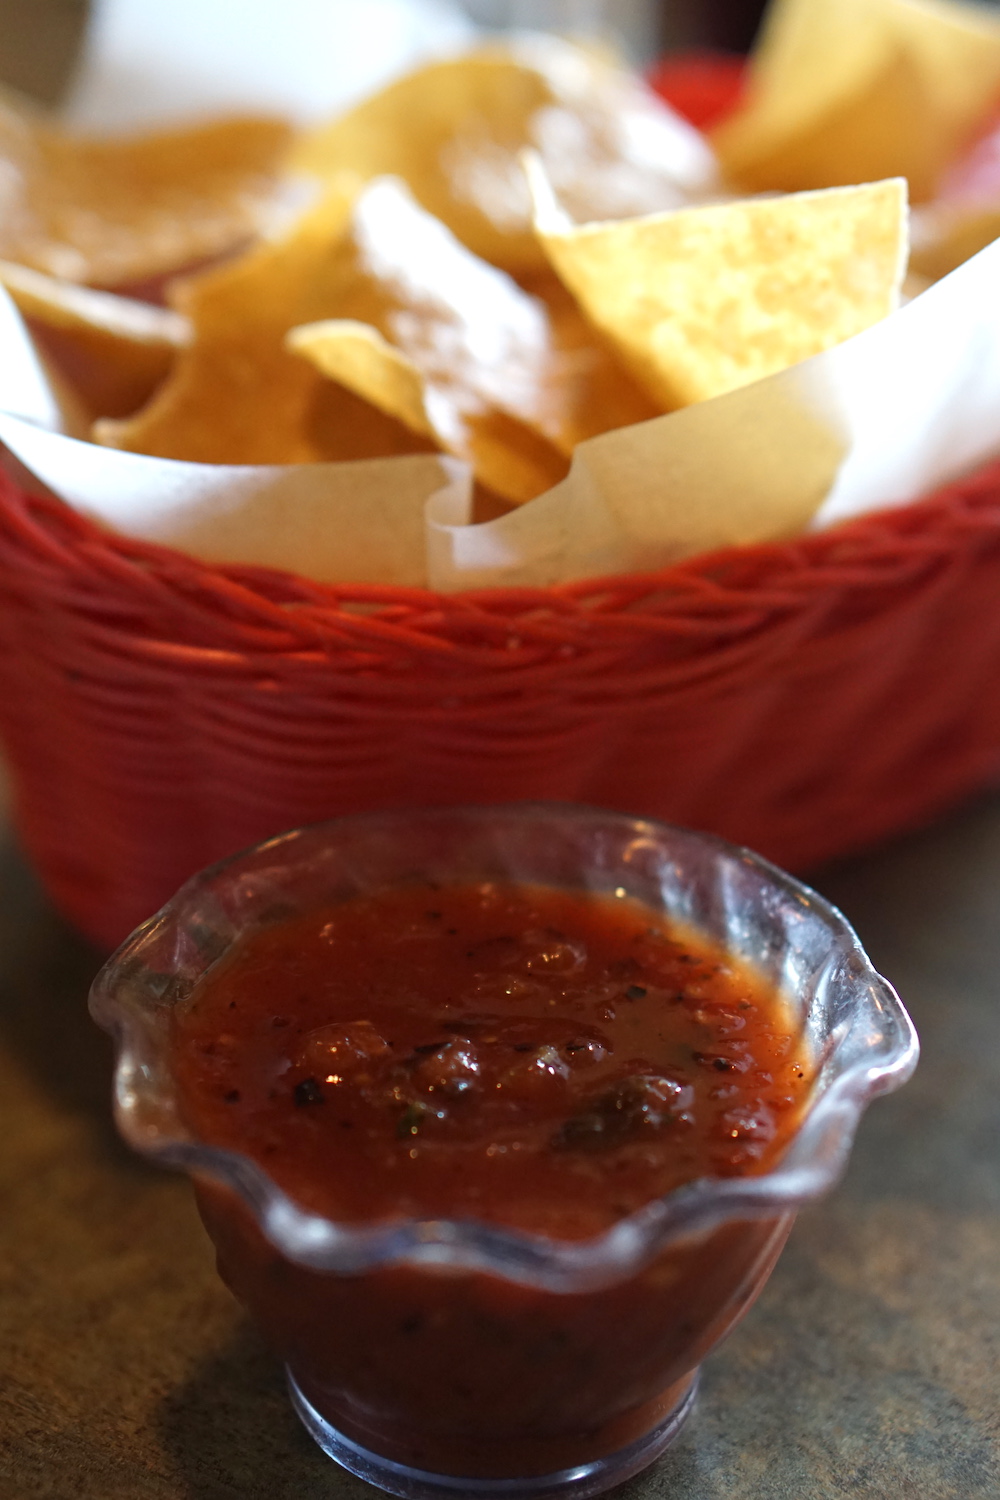 Great salsa and chips too!